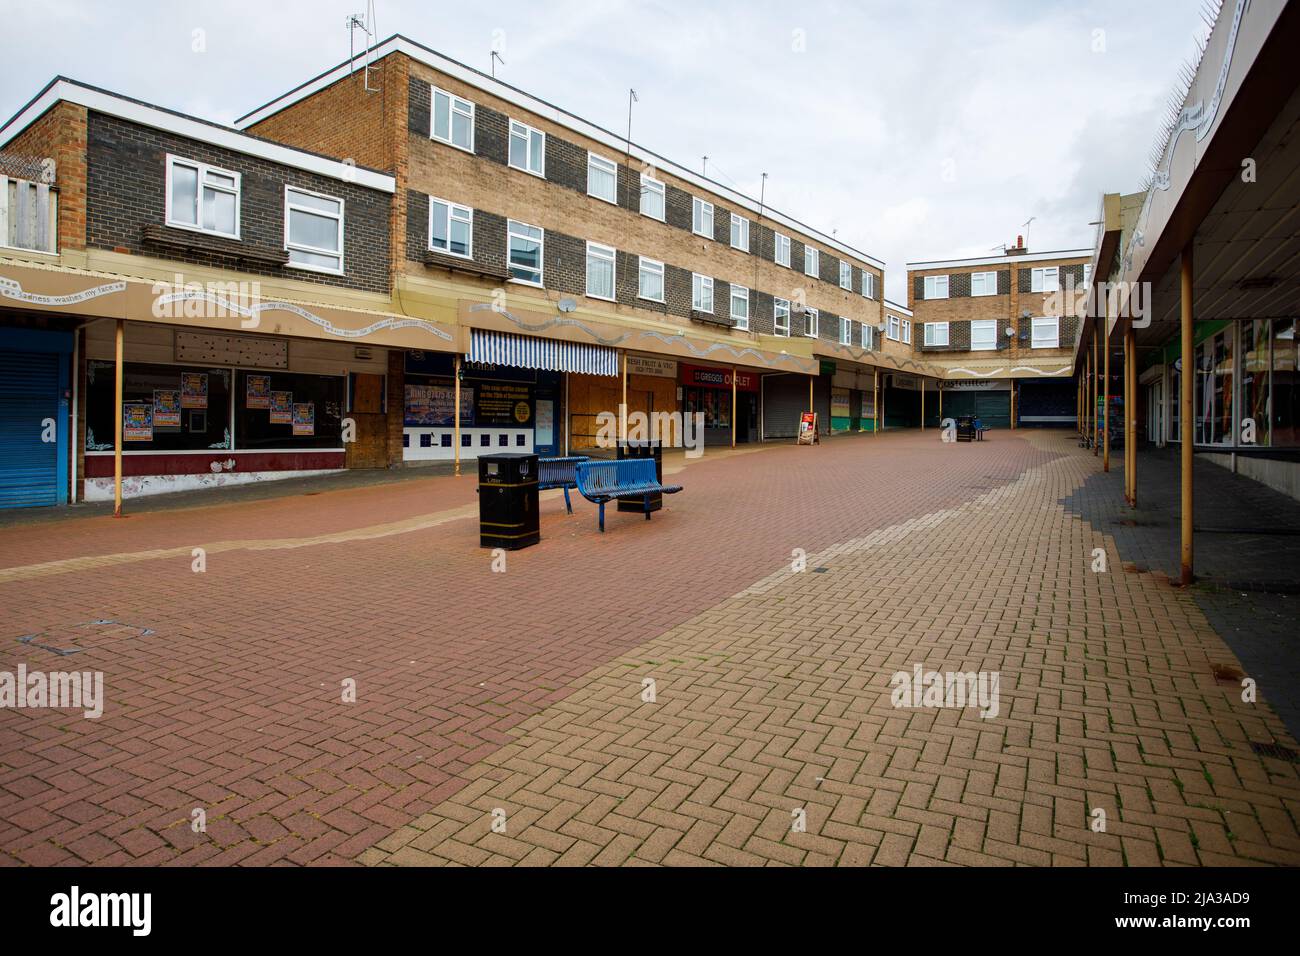 Kingshurst shopping centre. The centre is due to be demolished in the summer of 2022 to make way for a new development of shops and housing. The shopping centre is typical of those developed in the 1950, 1960 and 1970 period. Stock Photo